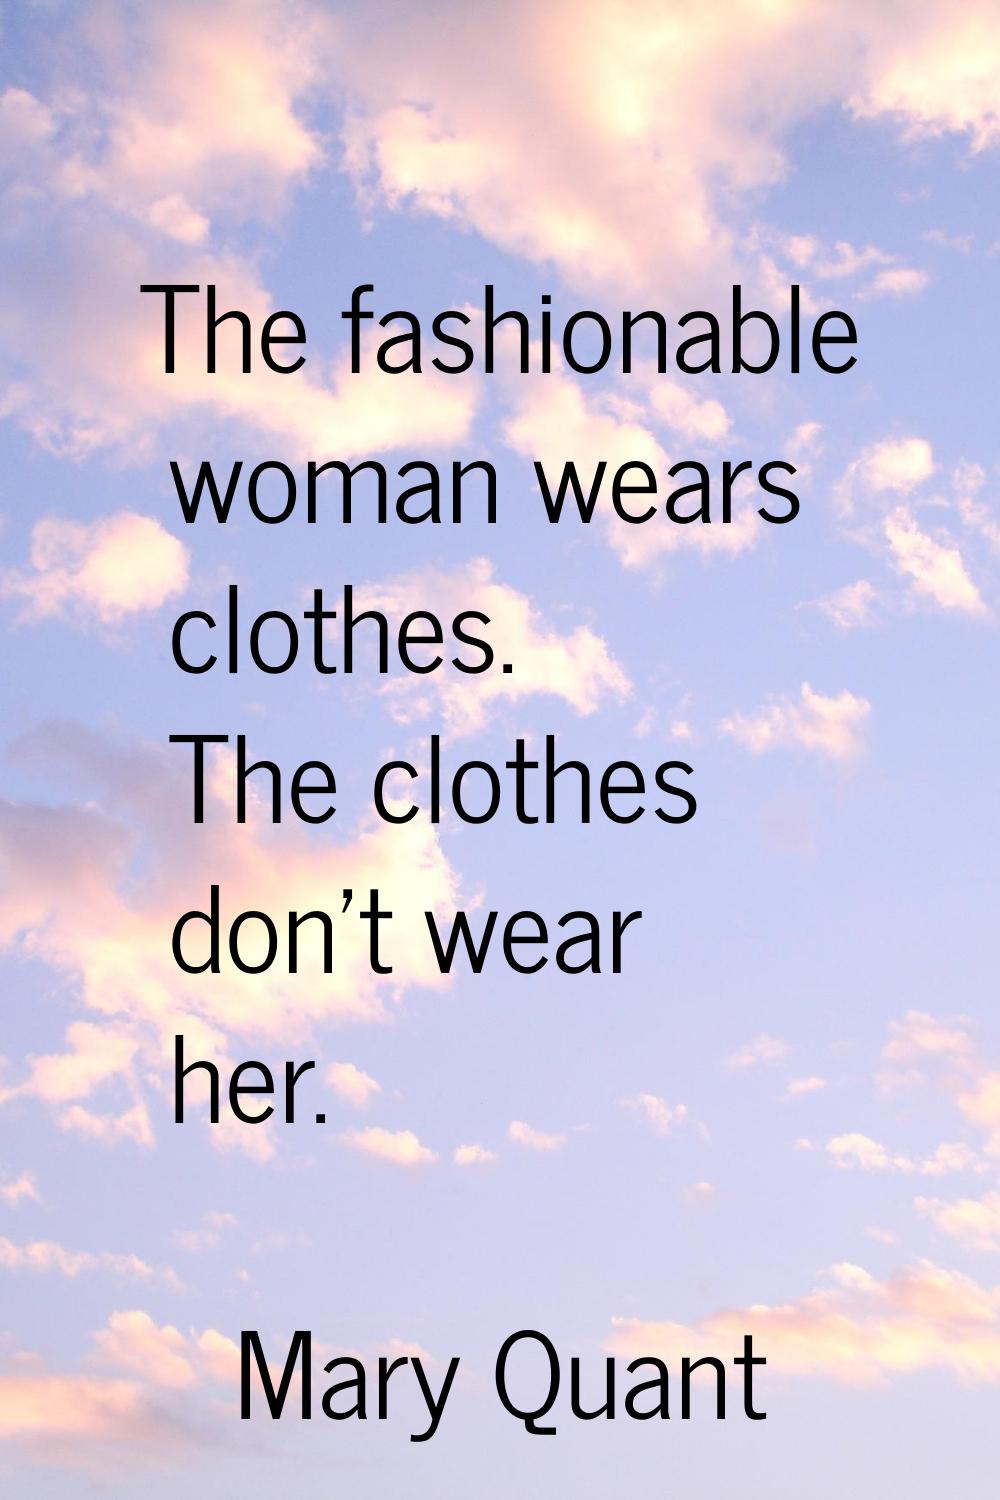 The fashionable woman wears clothes. The clothes don't wear her.